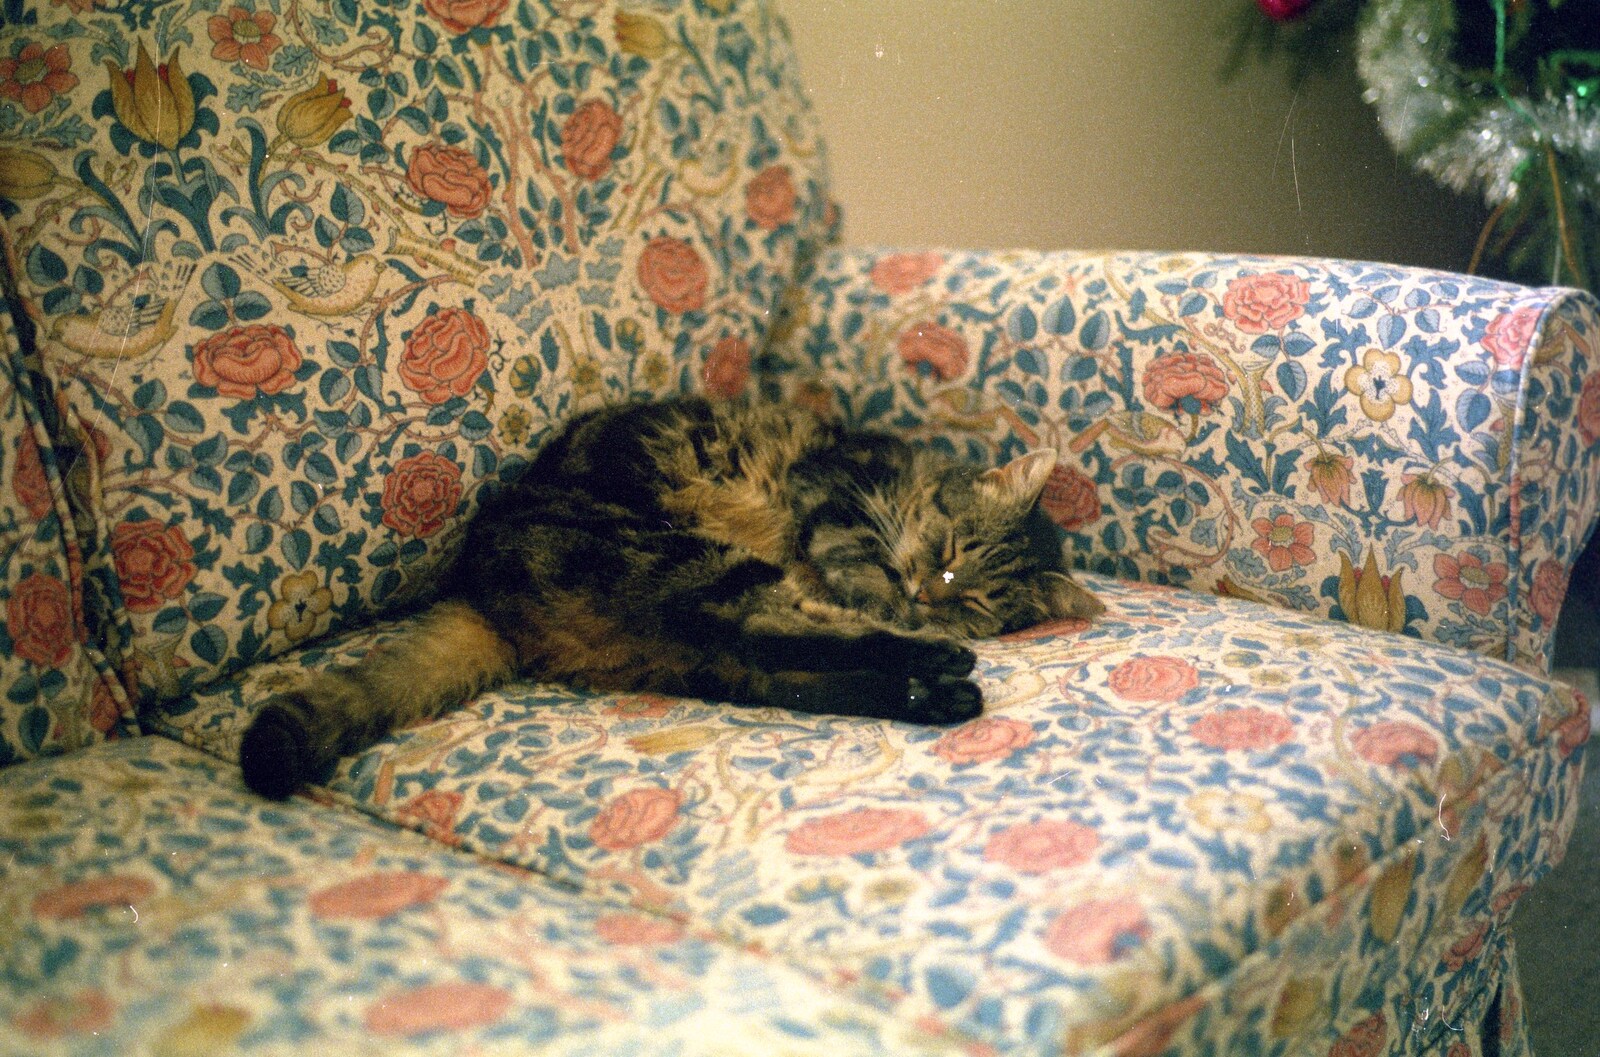 Florence on the sofa from Christmas with Neil and Caroline, Burton, Dorset - 25th December 1986